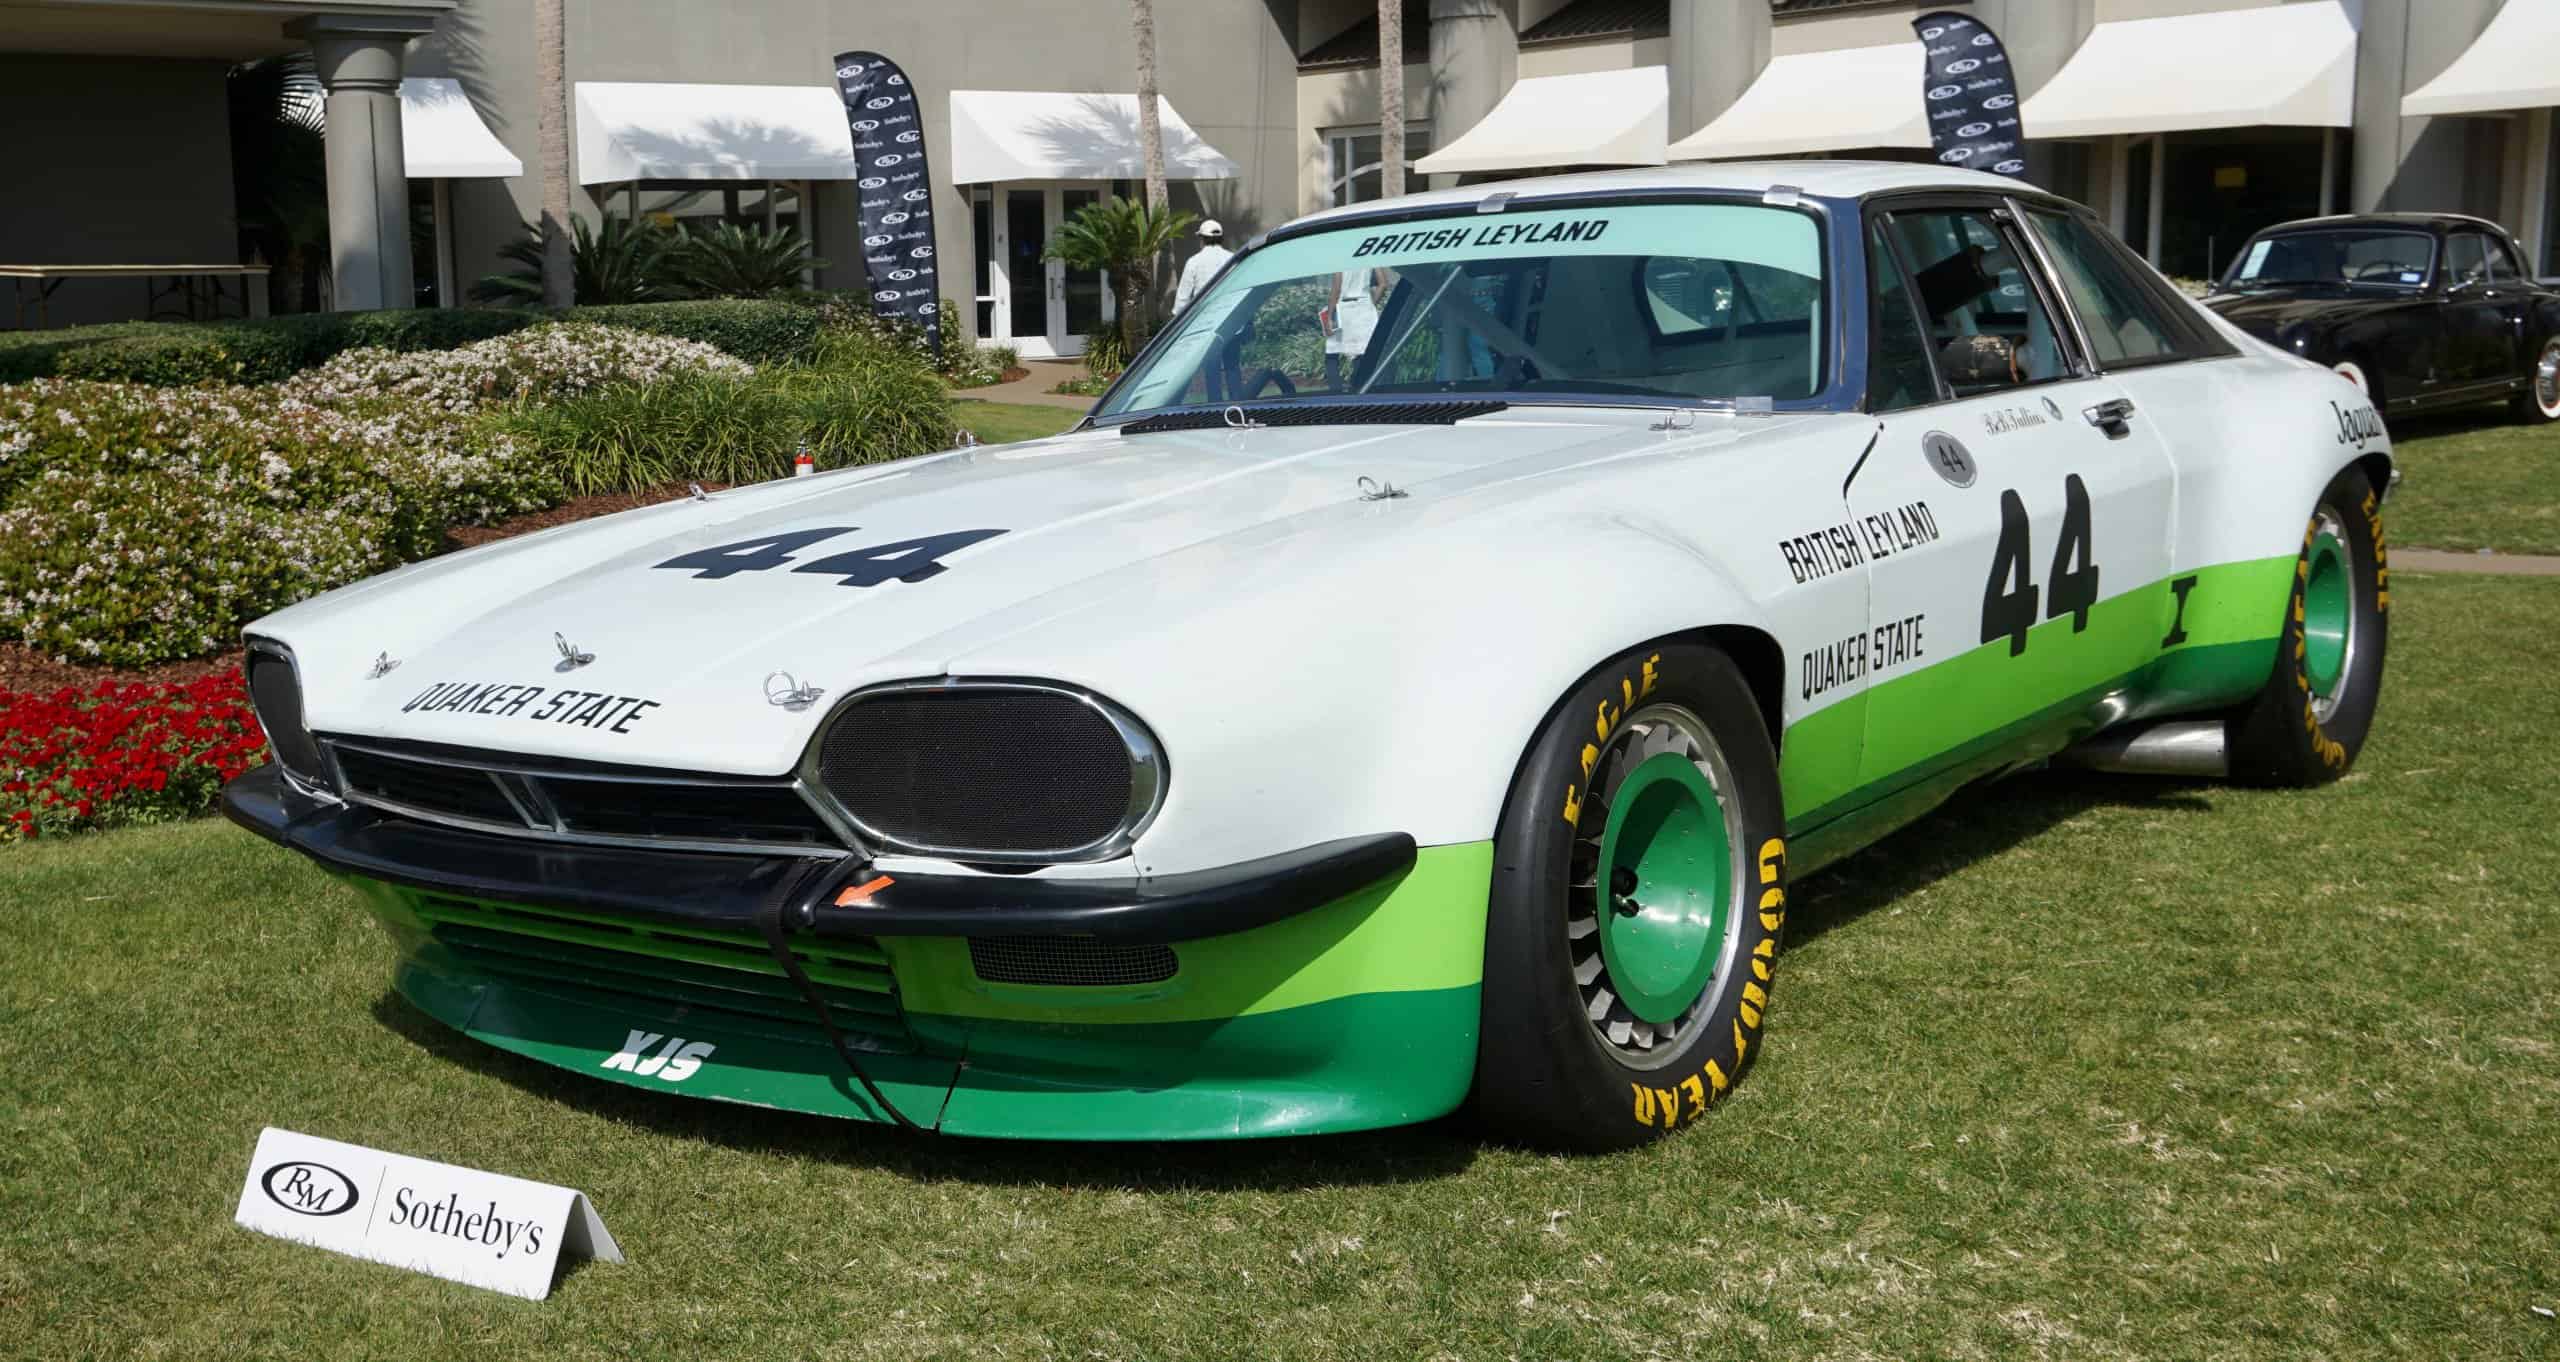 RM Sotheby's Amelia Island, Andy’s picks at RM Sotheby’s Amelia auction, ClassicCars.com Journal